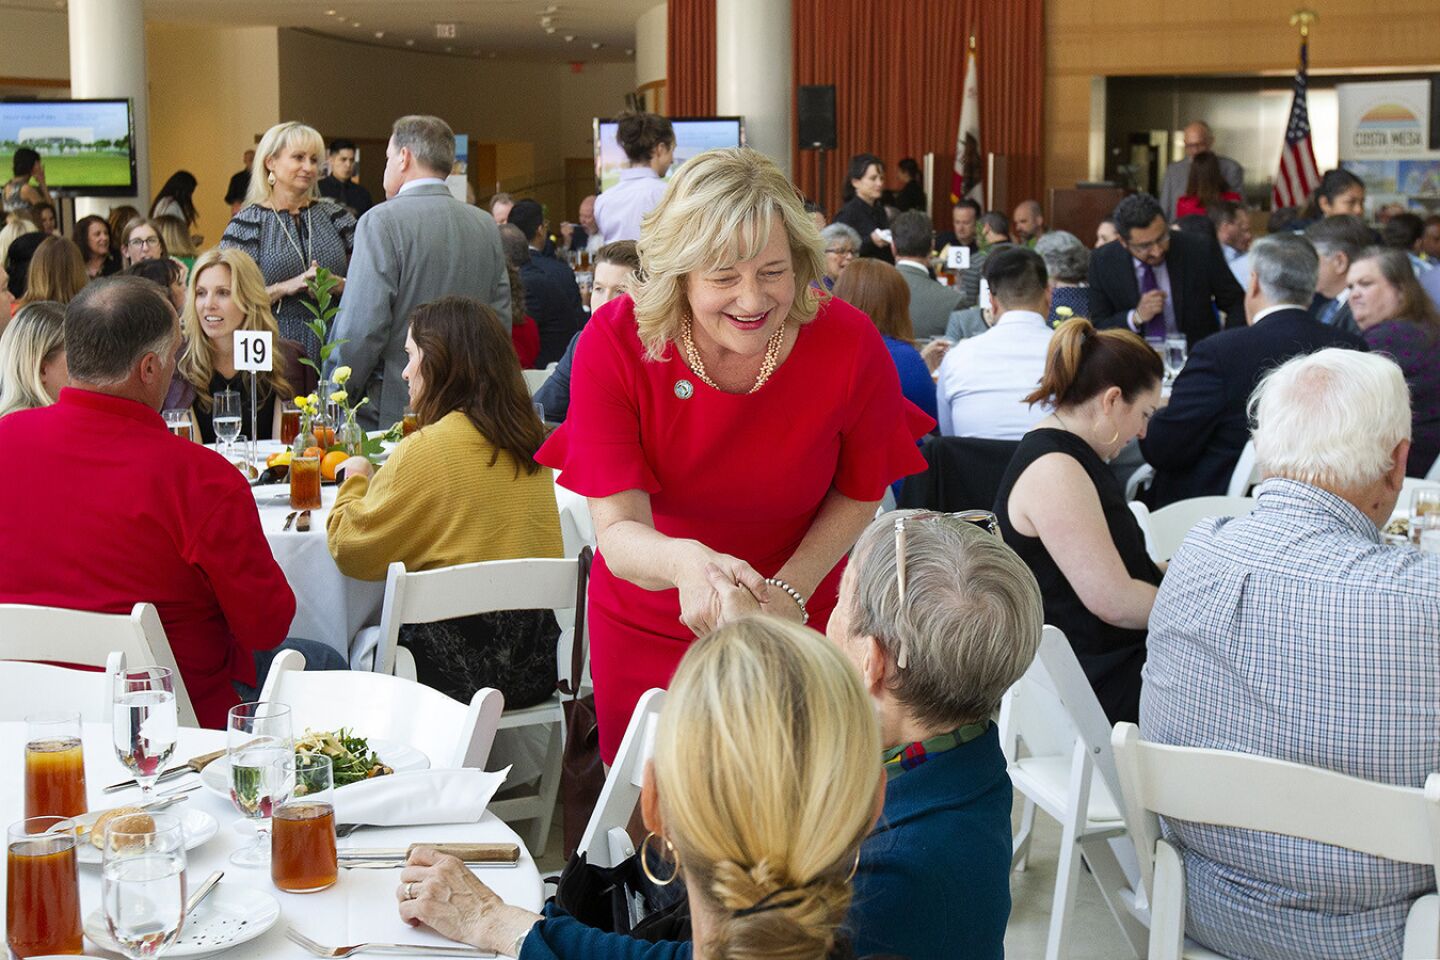 Photo Gallery: Costa Mesa State of the City luncheon and awards